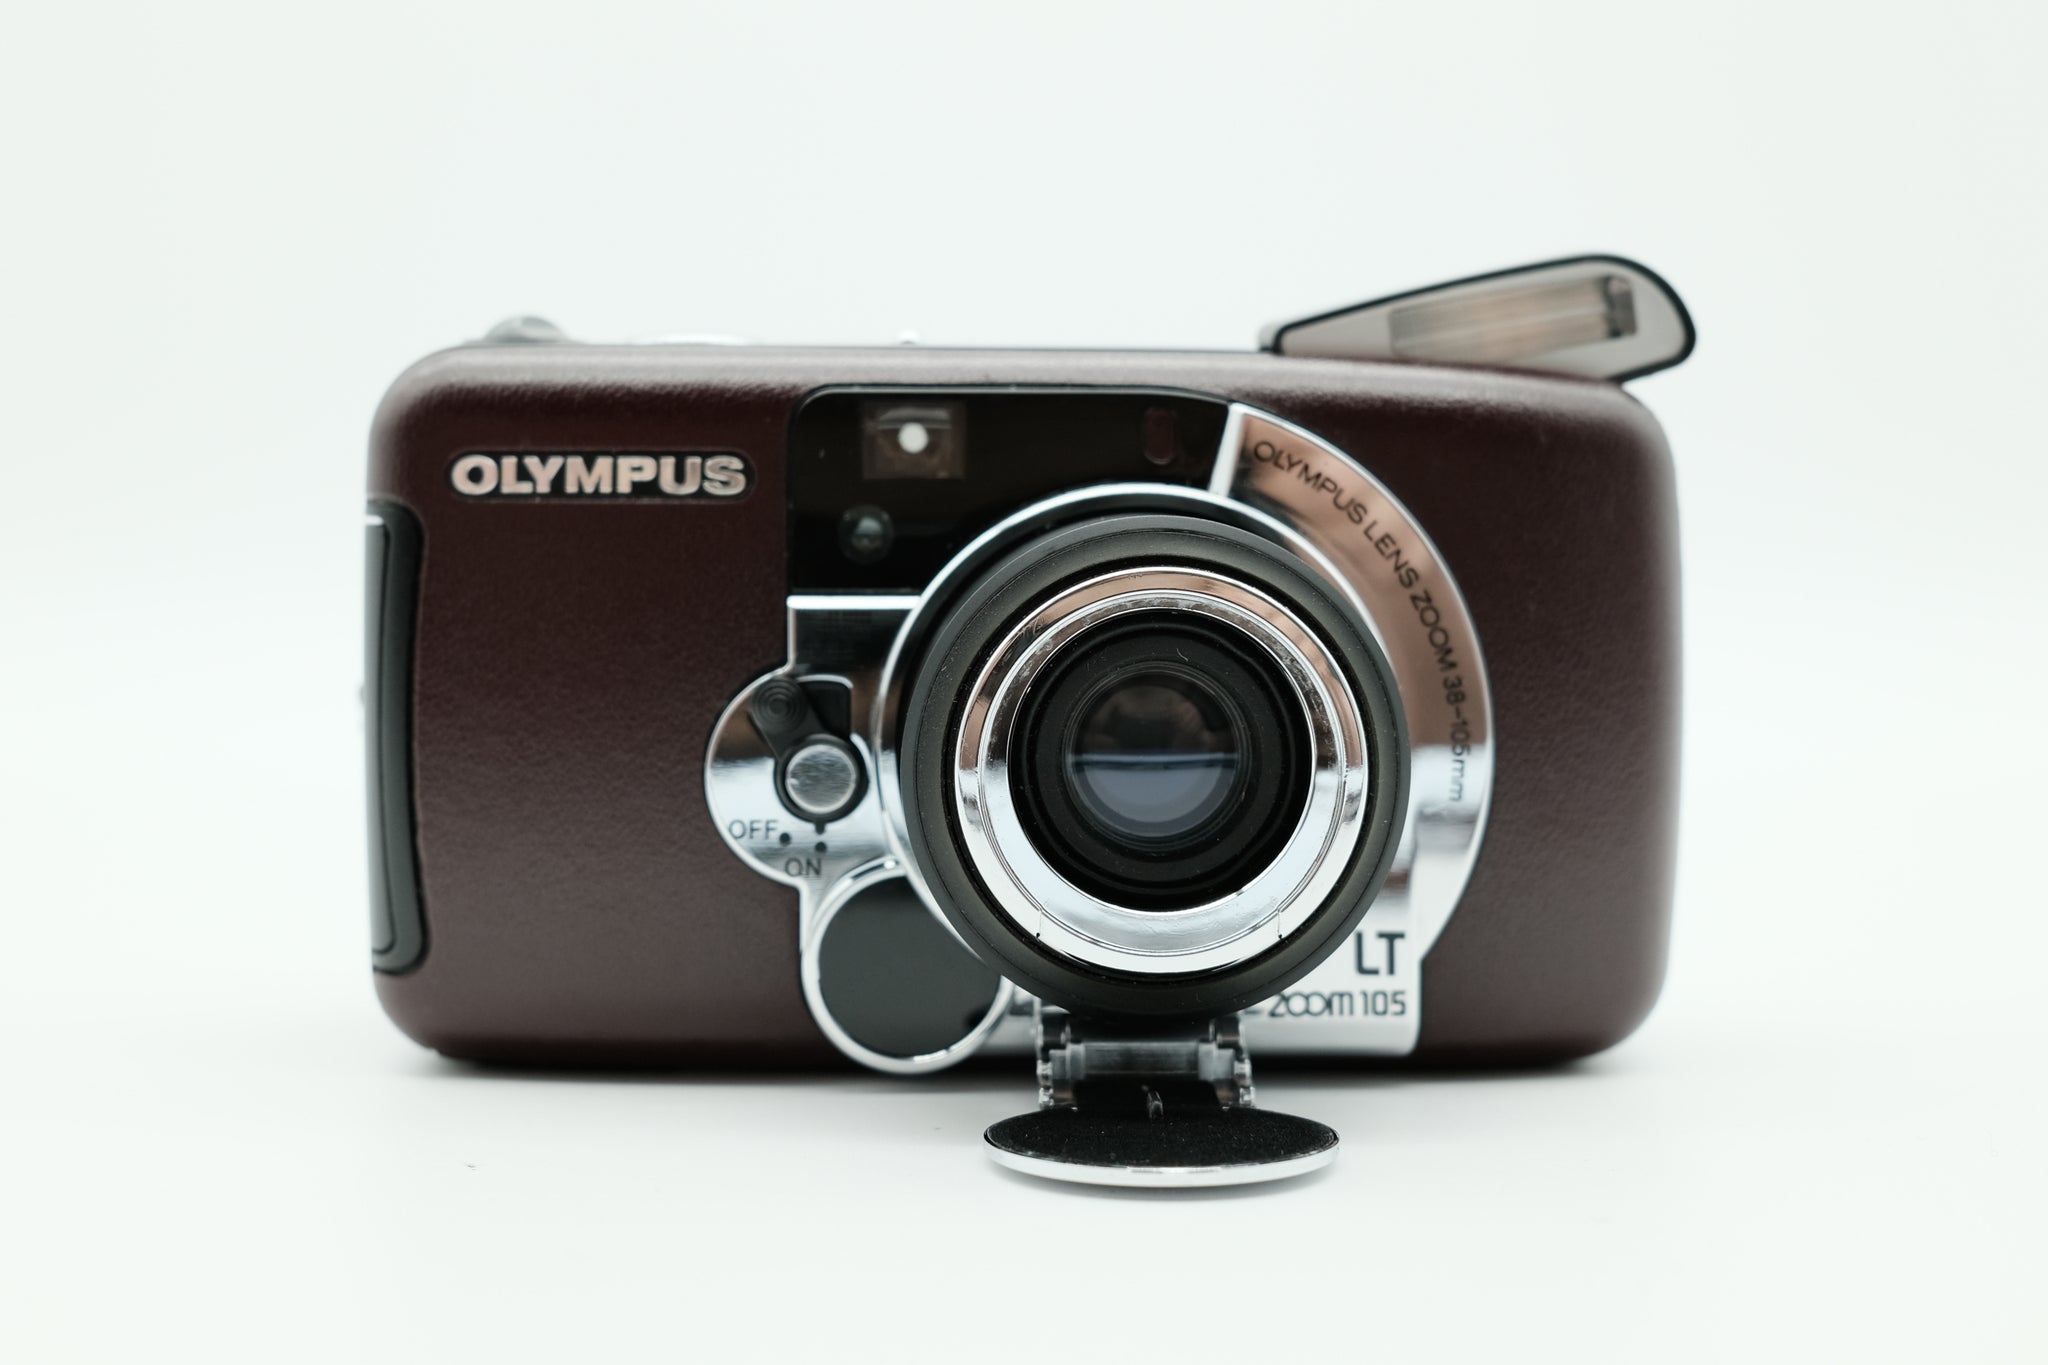 Olympus LT Zoom 105 - Great Cond